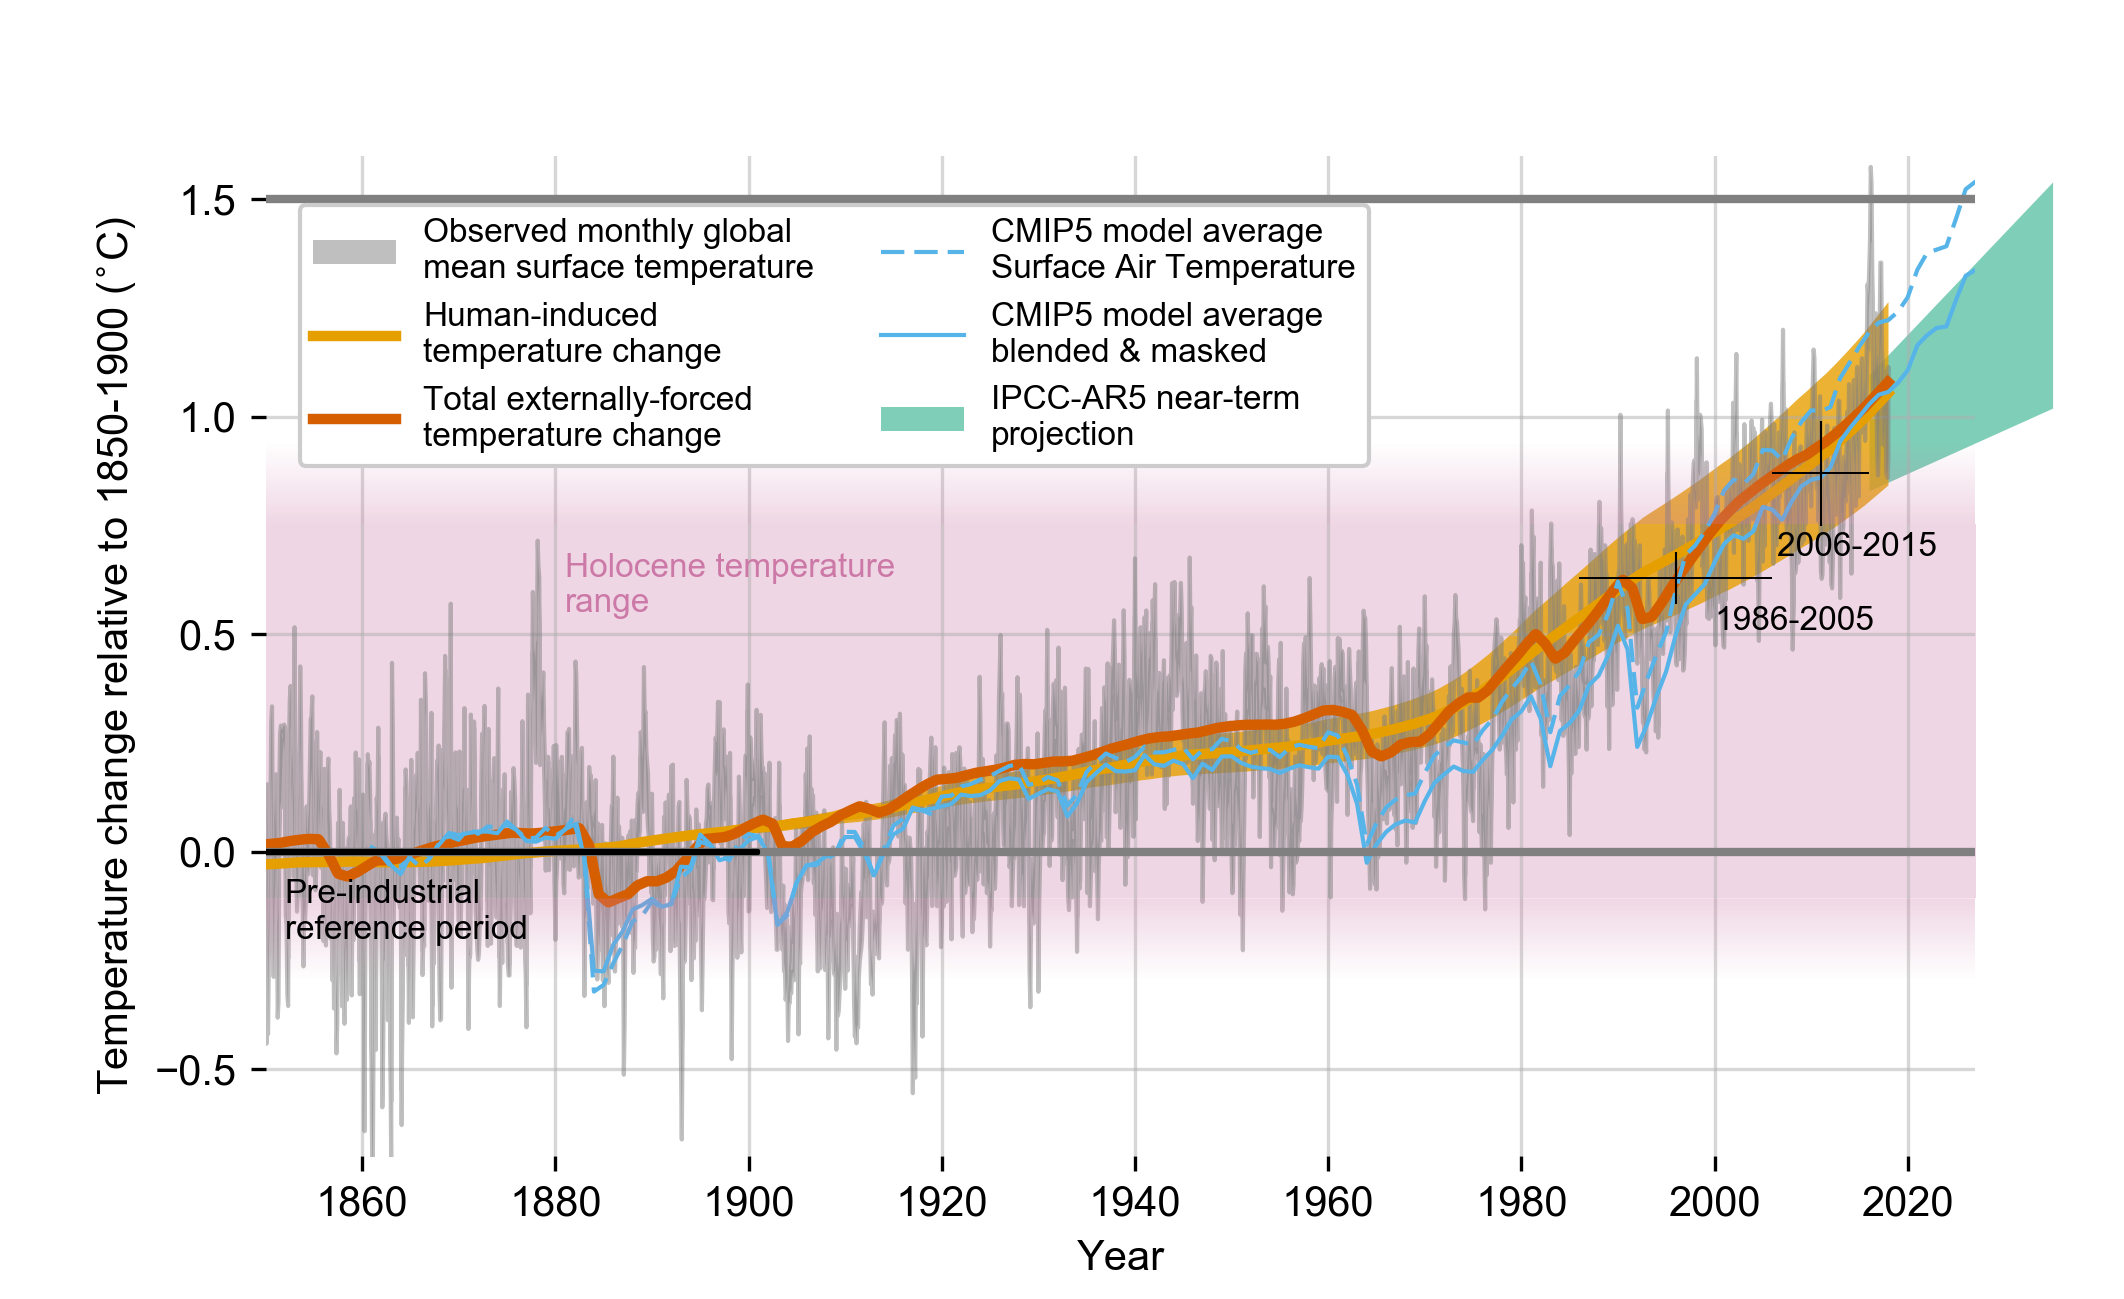 Temperature trend over the last 160 years <br>Source: IPCC 2019 special report on Global warming of 1.5°C